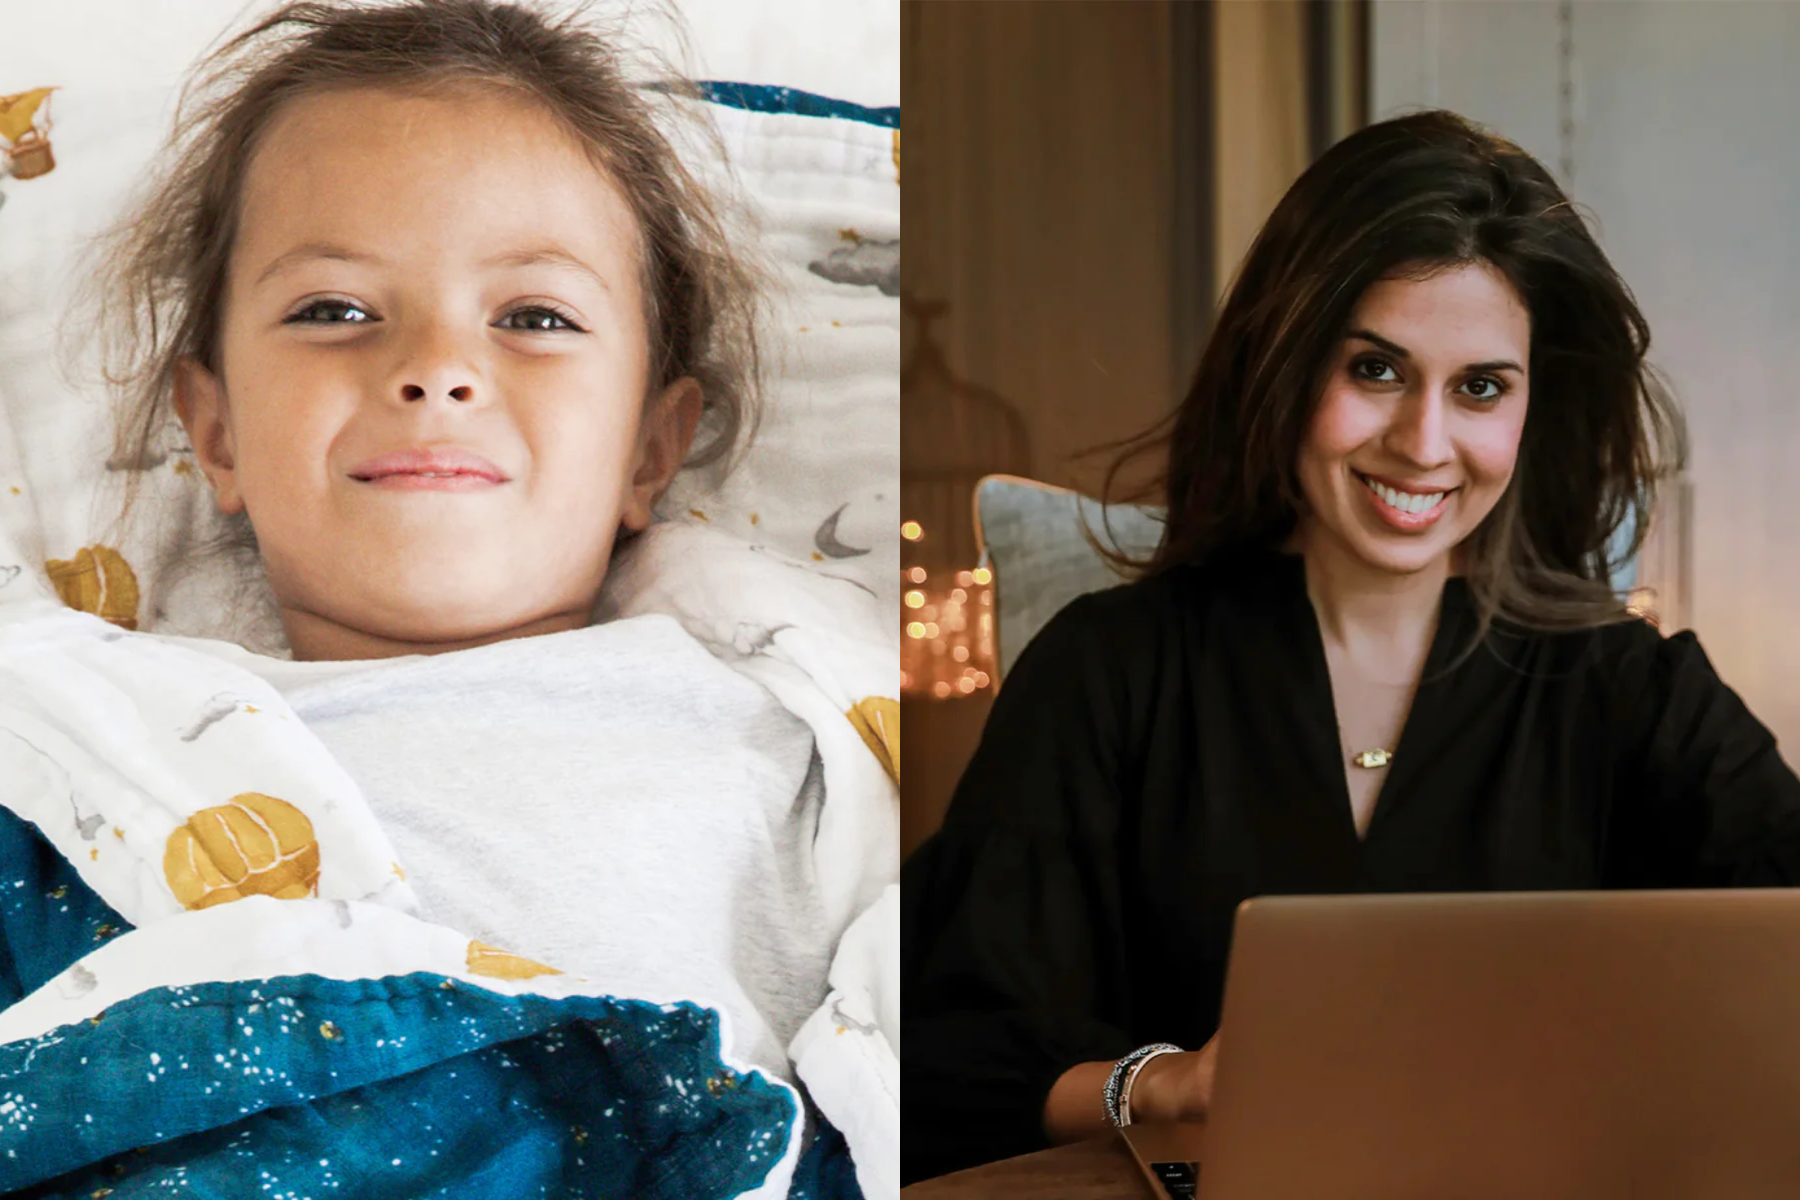 Led by Anjali Harjani-Hardasani, Malabar Baby offers handcrafted, natural cotton bedding and loungewear for kids, inspired by global cultures. The image shows a girl wearing Malabar Baby Kids Robe lying on Malabar Baby bedding. The image also shows Anjali, the founder of Malabar Baby.